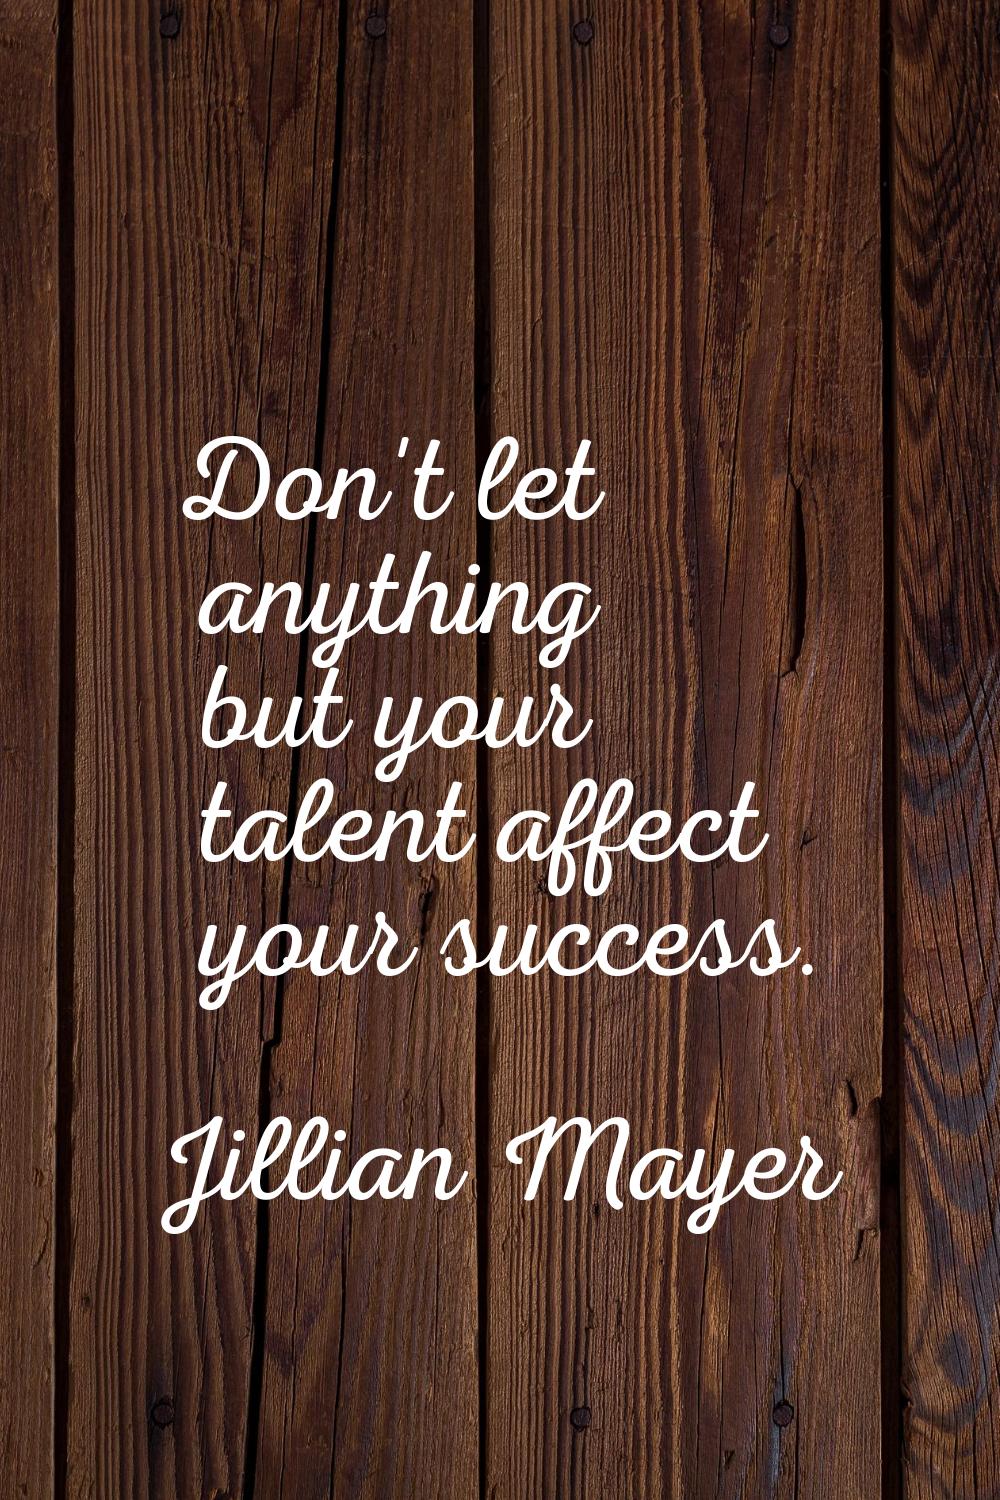 Don't let anything but your talent affect your success.